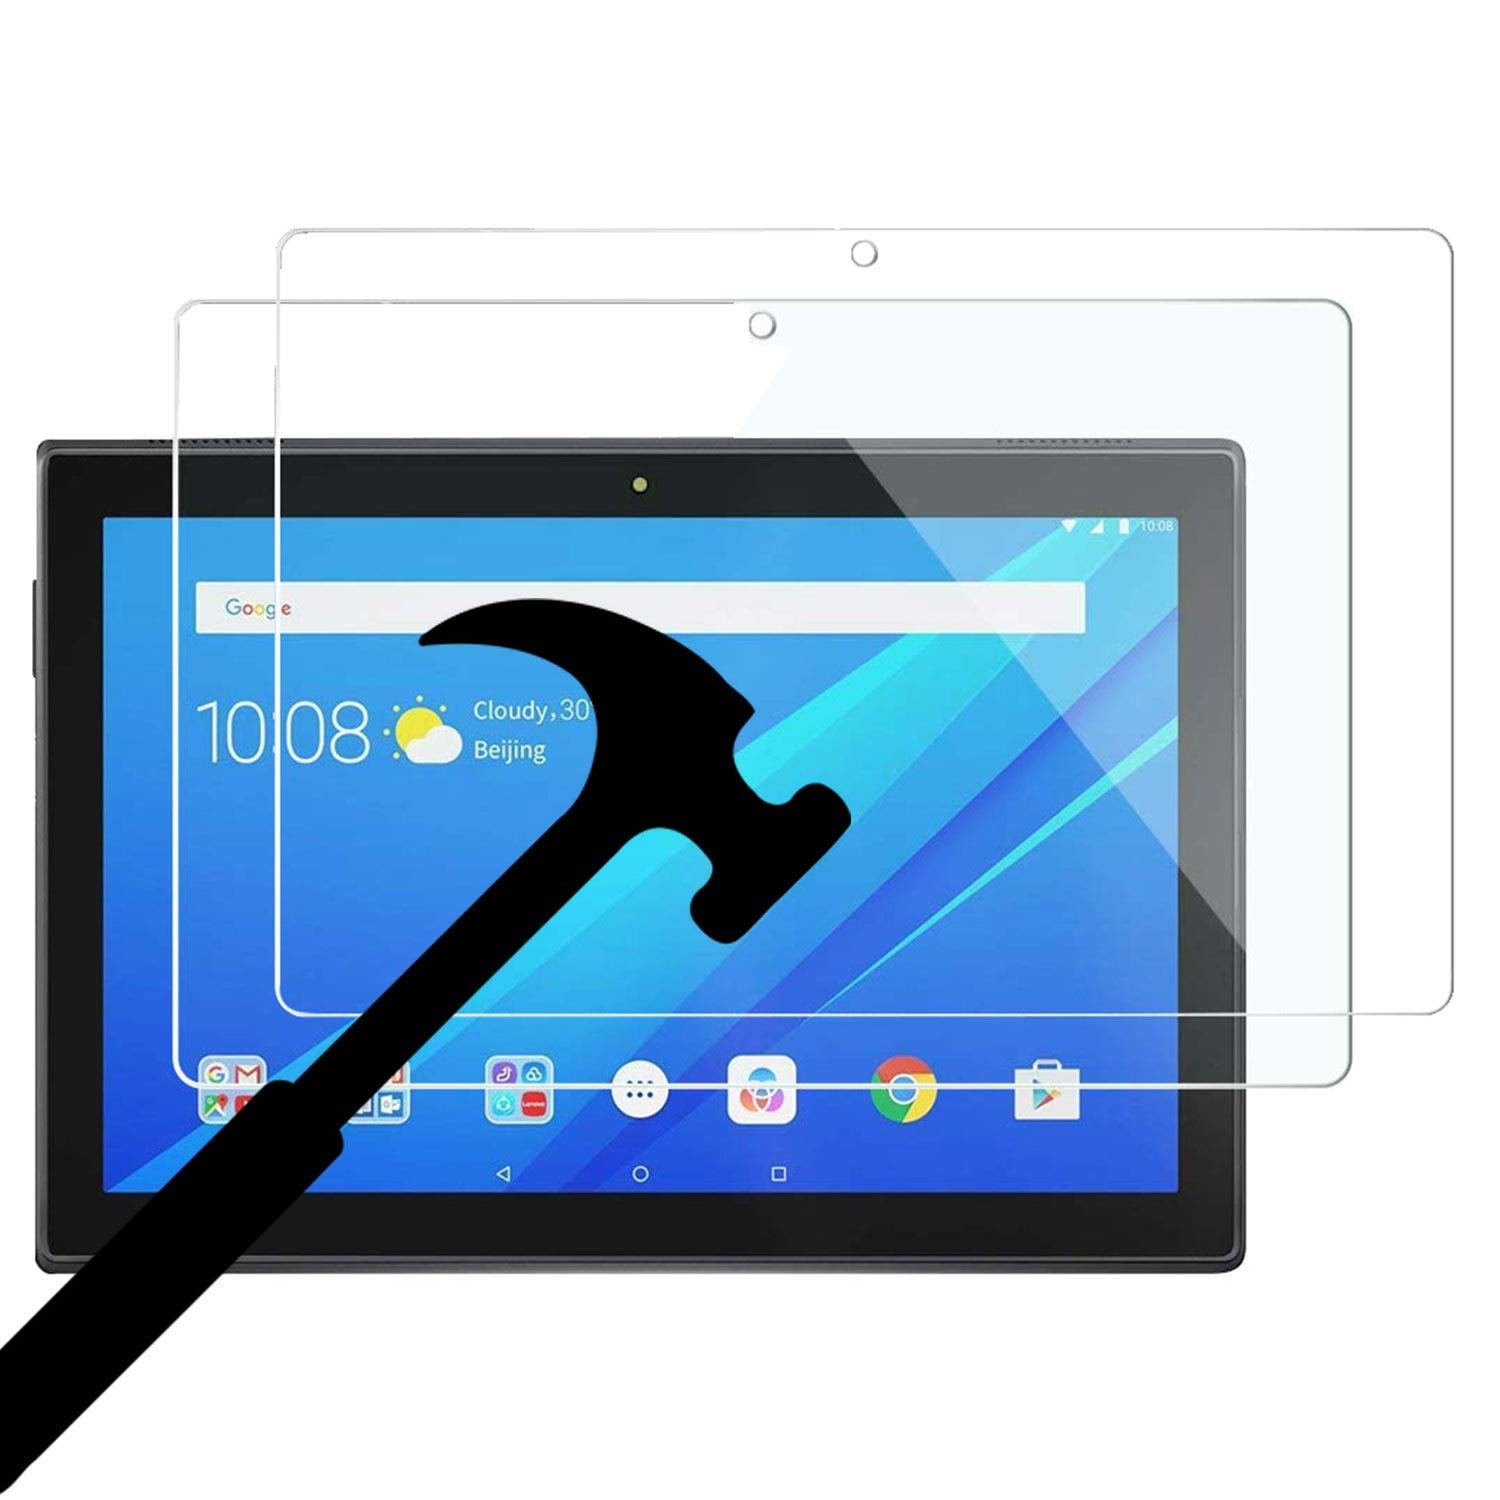 Gard® Premium Crystal Clear Screen Protector for Lenovo Tab 3 10.1 Inch Tablet 